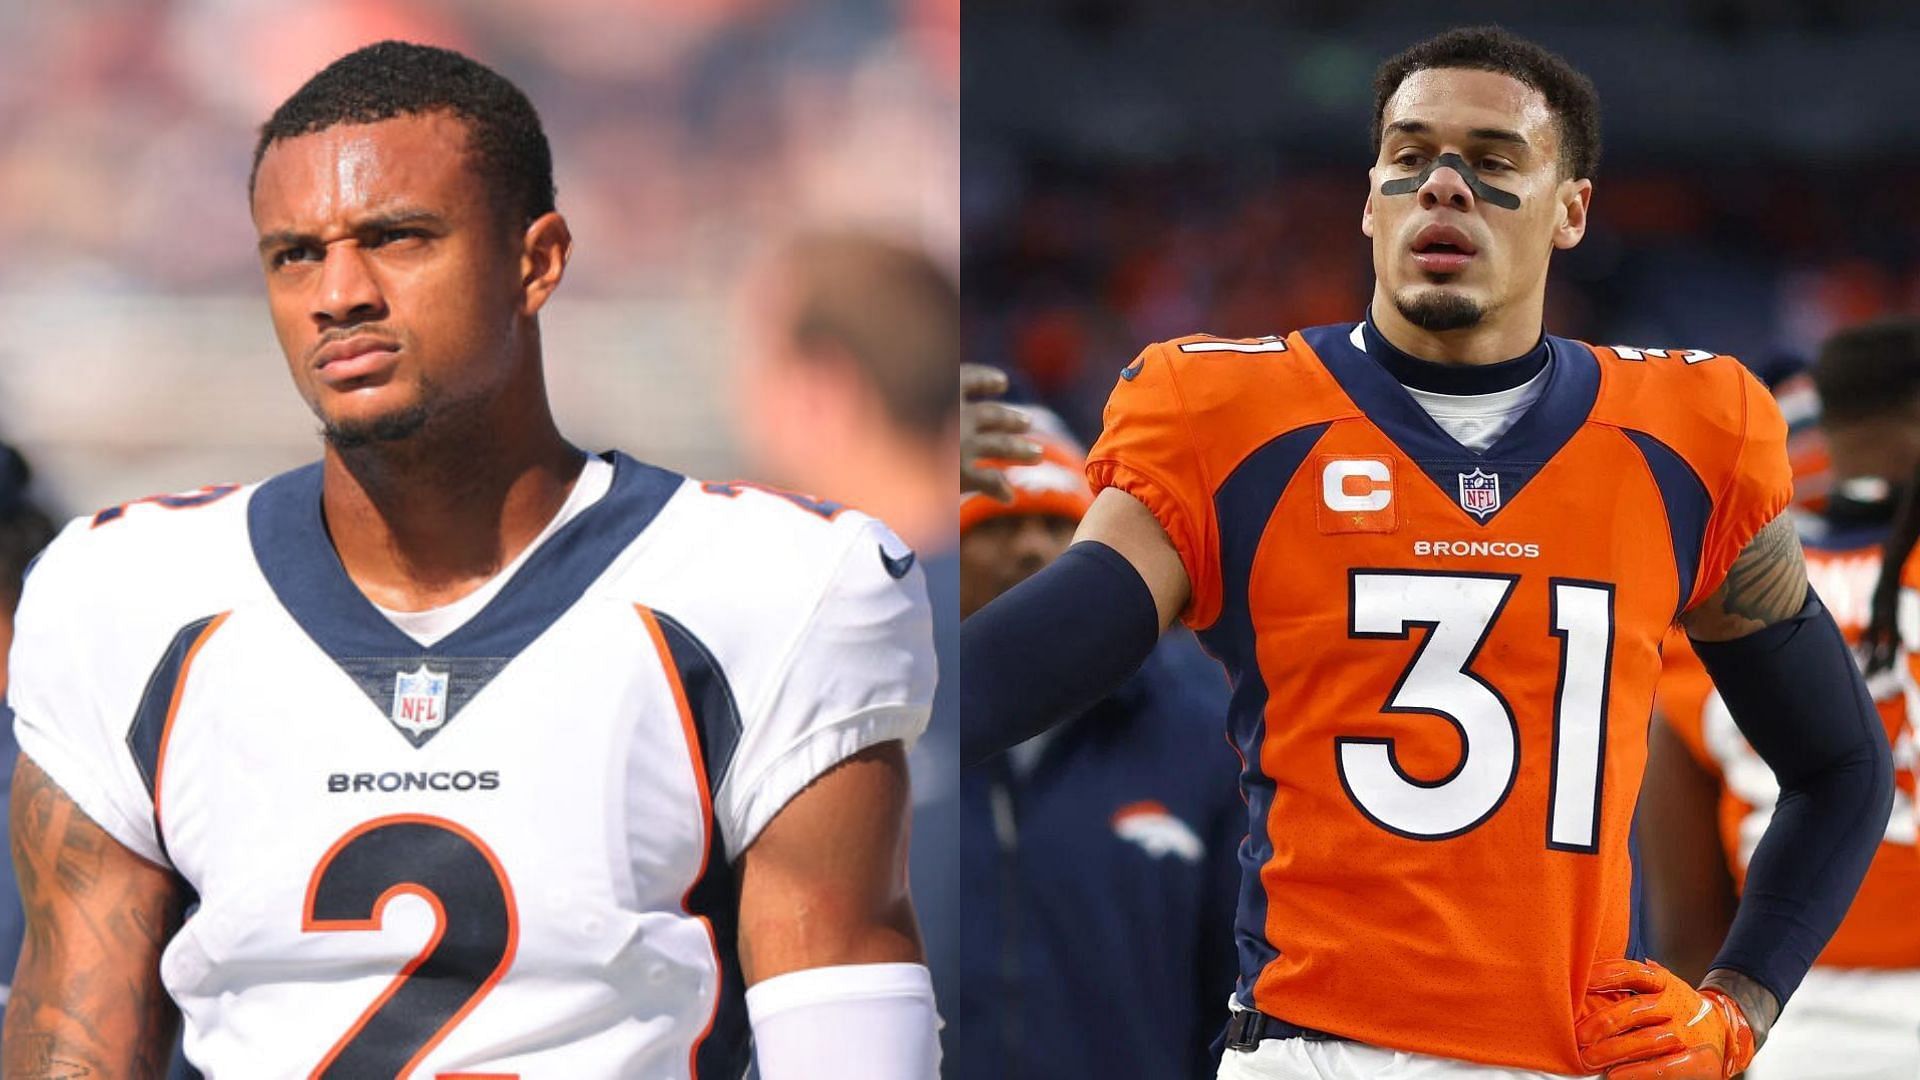 Could Broncos defensive backs Patrick Surtain II and Justin Simmons be on the move?